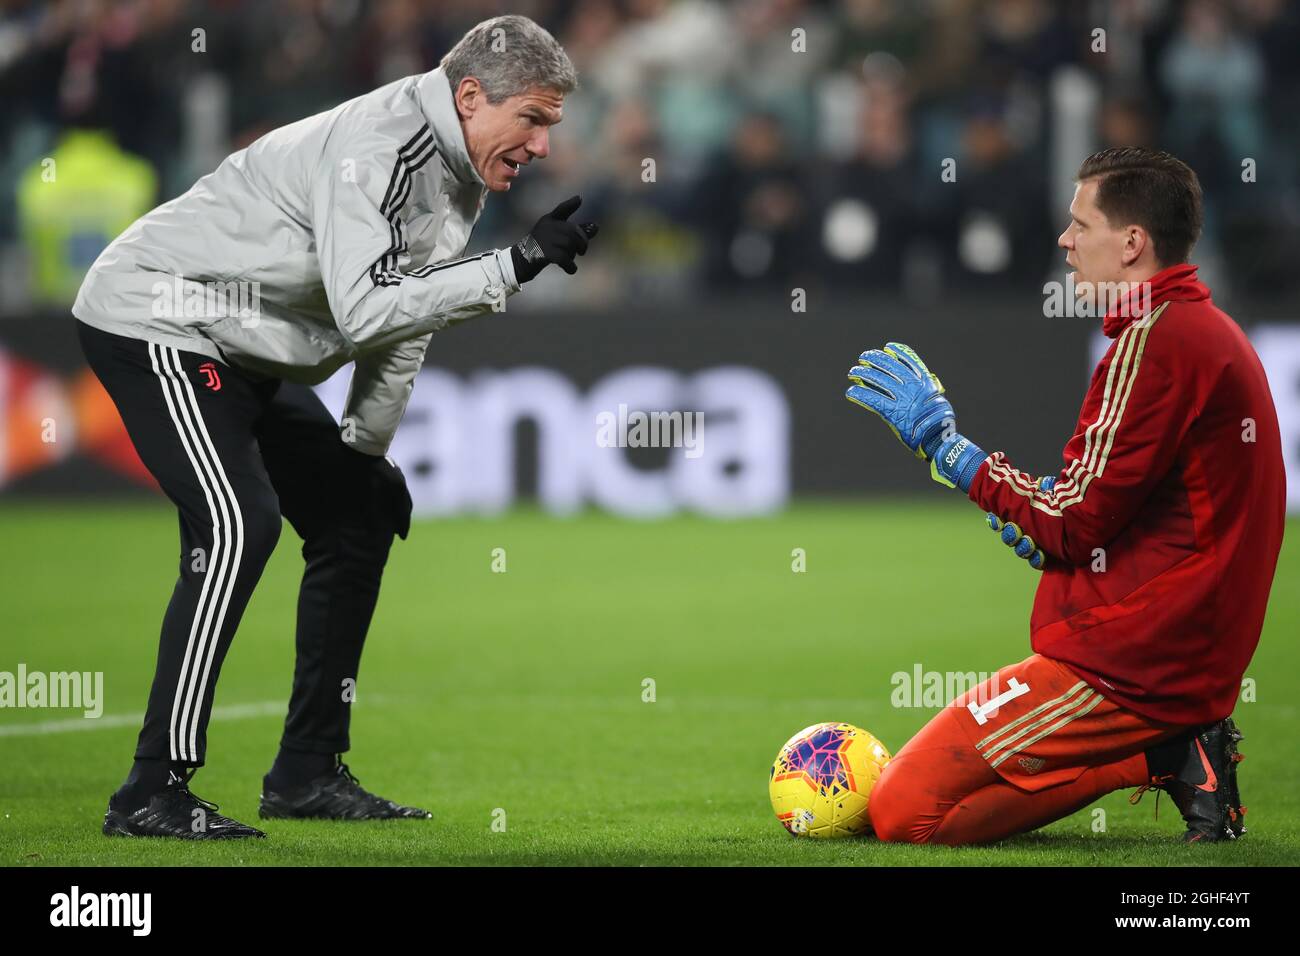 Juventus goalkeeping coach Claudio Filippi speaks with Wojciech Szczesny before the Serie A match at Allianz Stadium, Turin. Picture date: 10th November 2019. Picture credit should read: Jonathan Moscrop/Sportimage via PA Images Stock Photo